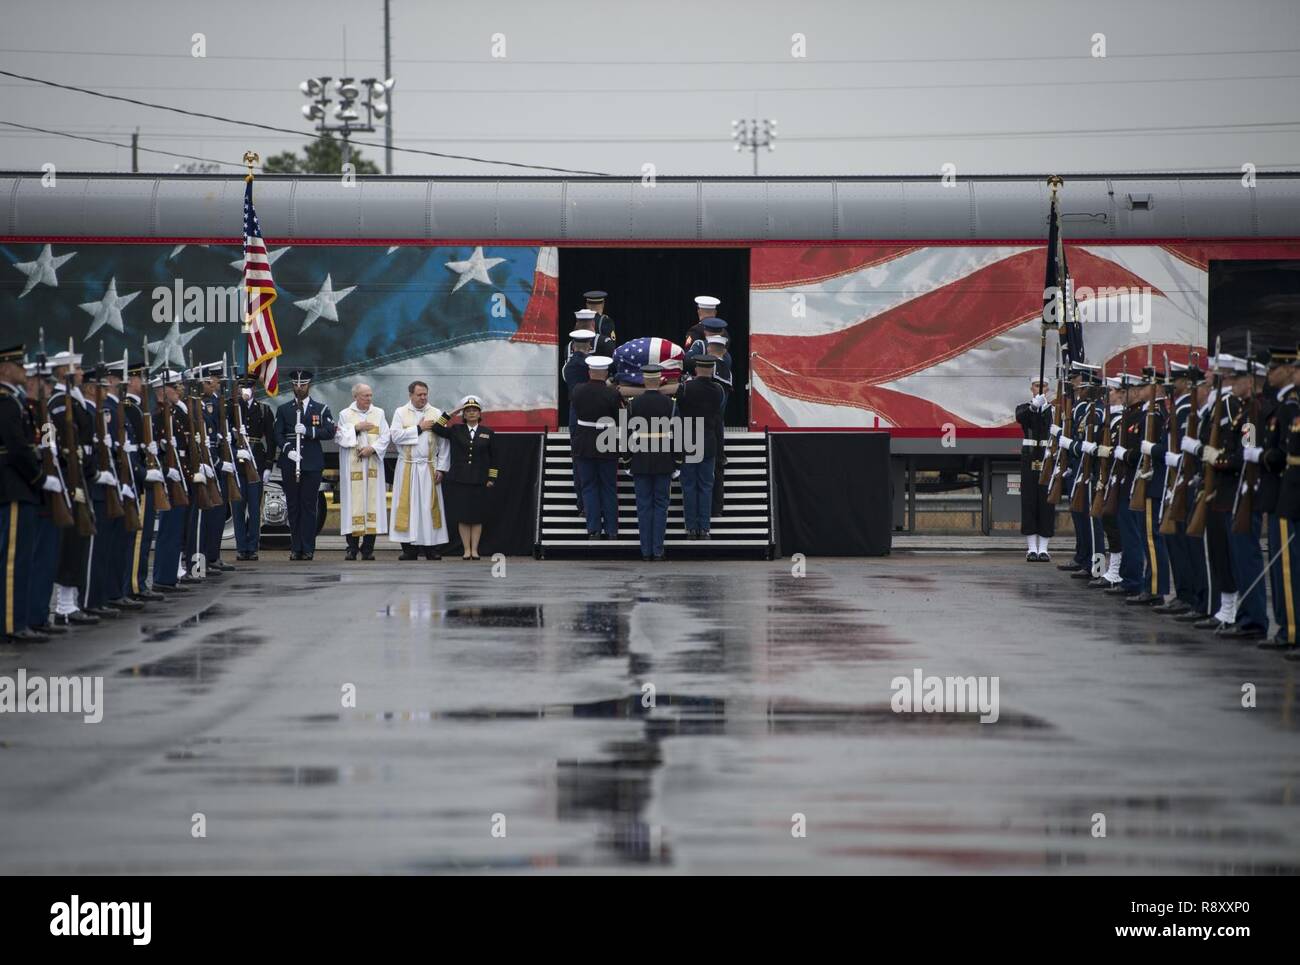 U.S. service members with the Joint Forces Honor Guard carry the casket of former U.S. President George H.W. Bush to a funeral car during a departure ceremony at Union Pacific Westfield Auto Facility, Spring, Texas, Dec. 6, 2018. The funeral car was pulled by the 4141 locomotive and carried George H.W. Bush's remains toward his final resting place. Nearly 4,000 military and civilian personnel from across all branches of the U.S. armed forces, including Reserve and National Guard components, provided ceremonial support during the state funeral of George H.W. Bush, the 41st President of the Unit Stock Photo